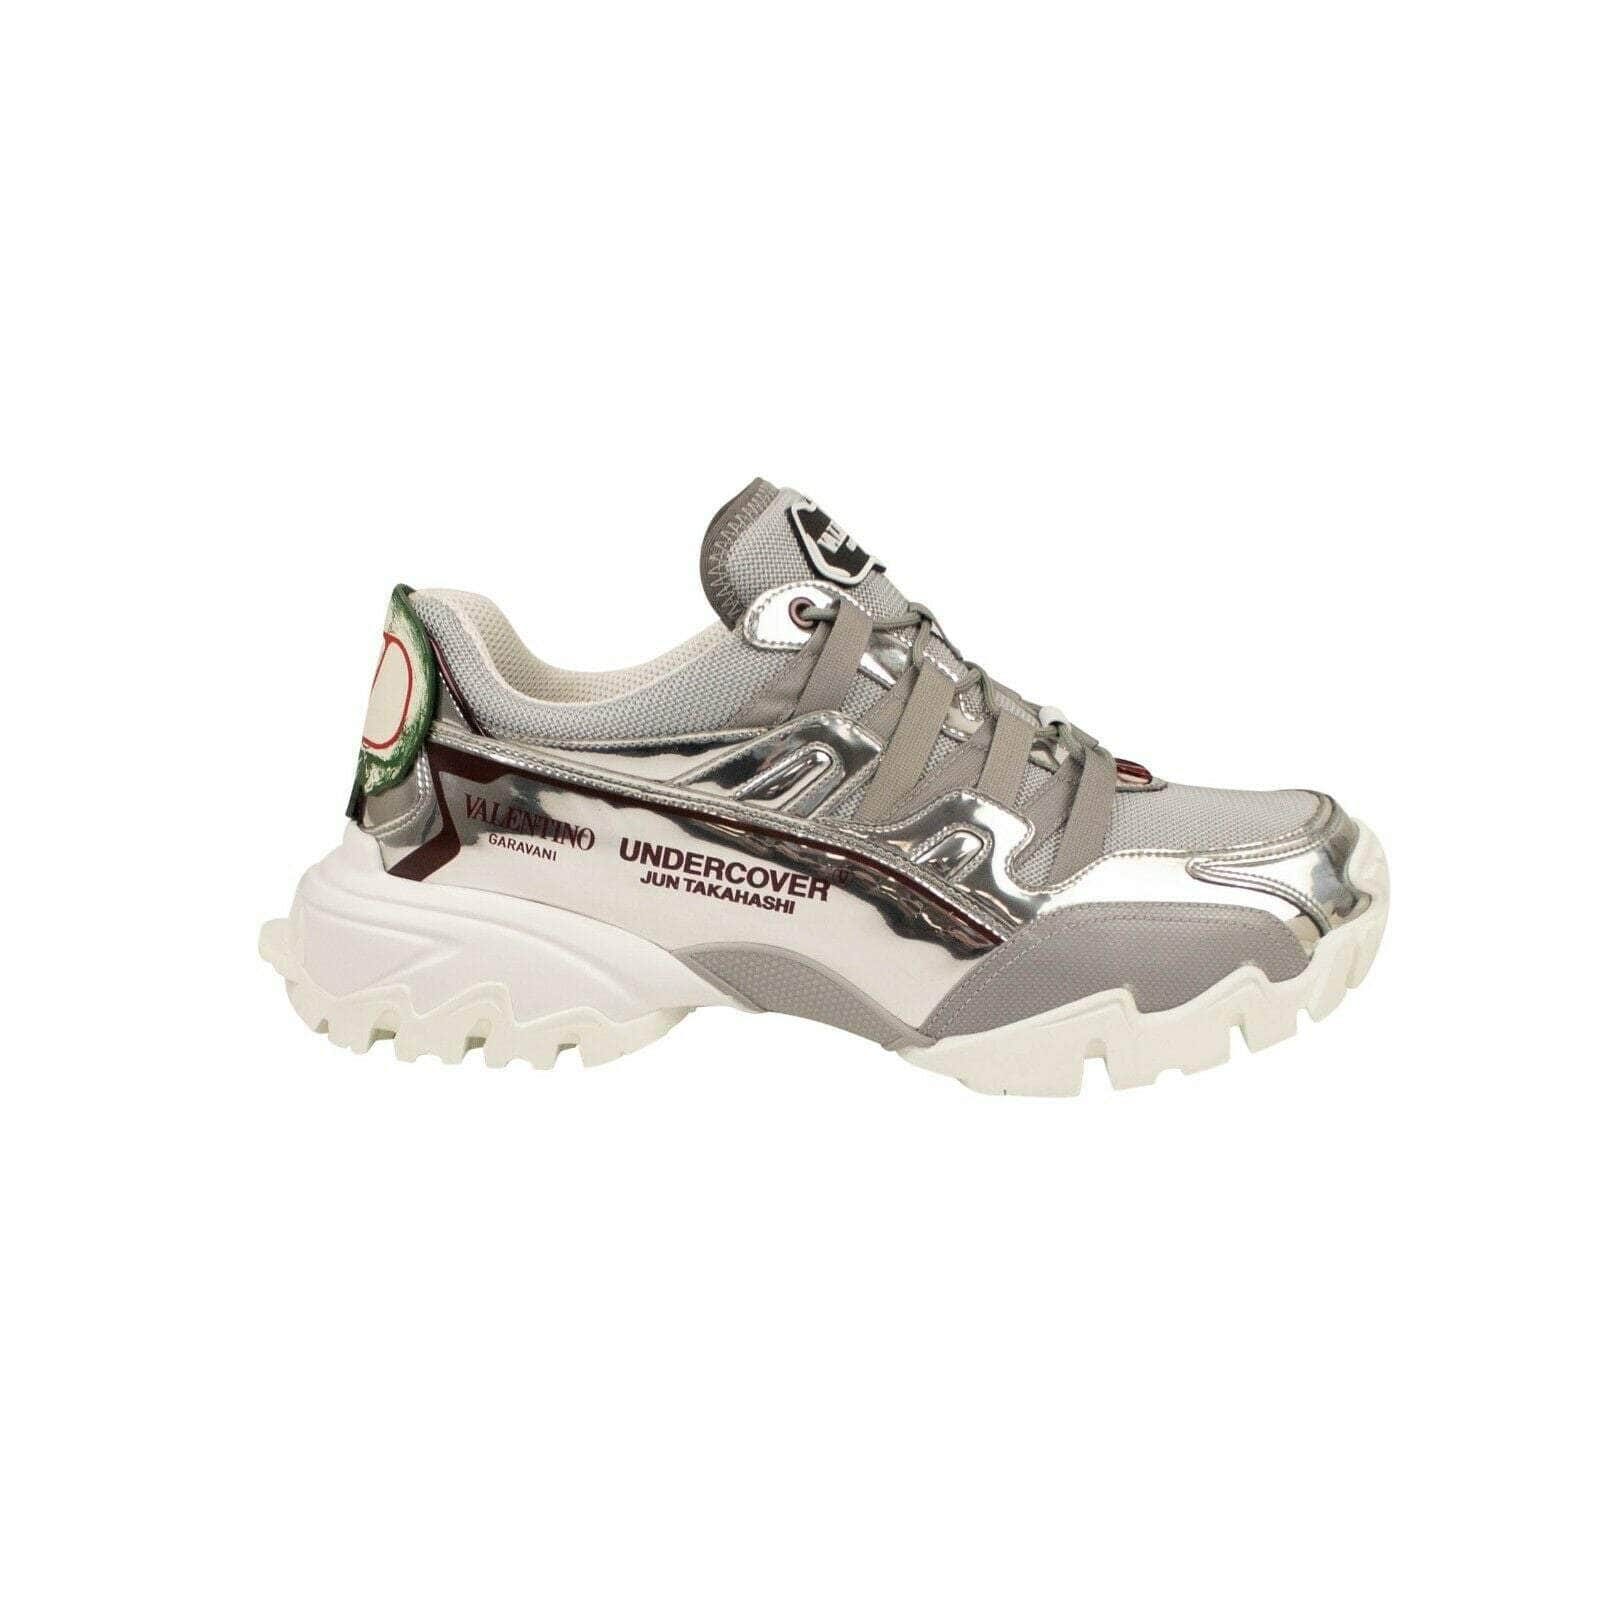 Valentino x Undercover 750-1000, channelenable-all, chicmi, couponcollection, gender-mens, main-shoes, size-40, size-41, size-42, size-43, valentino-x-undercover Silver Climber Sneakers